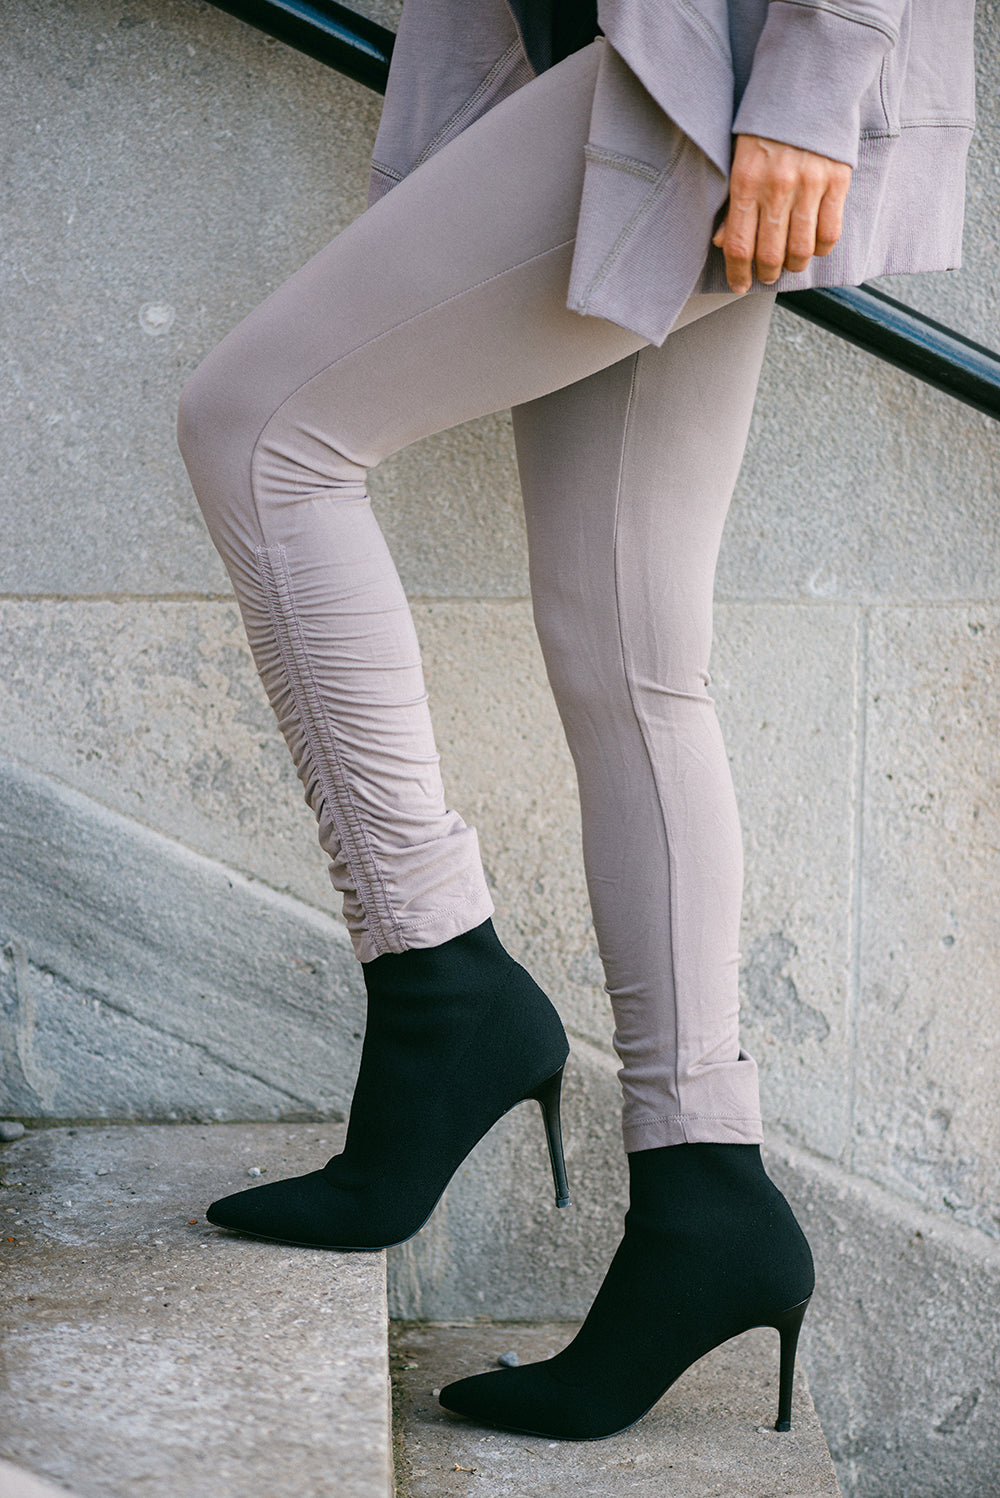 Ruched Movement Legging - Taupe